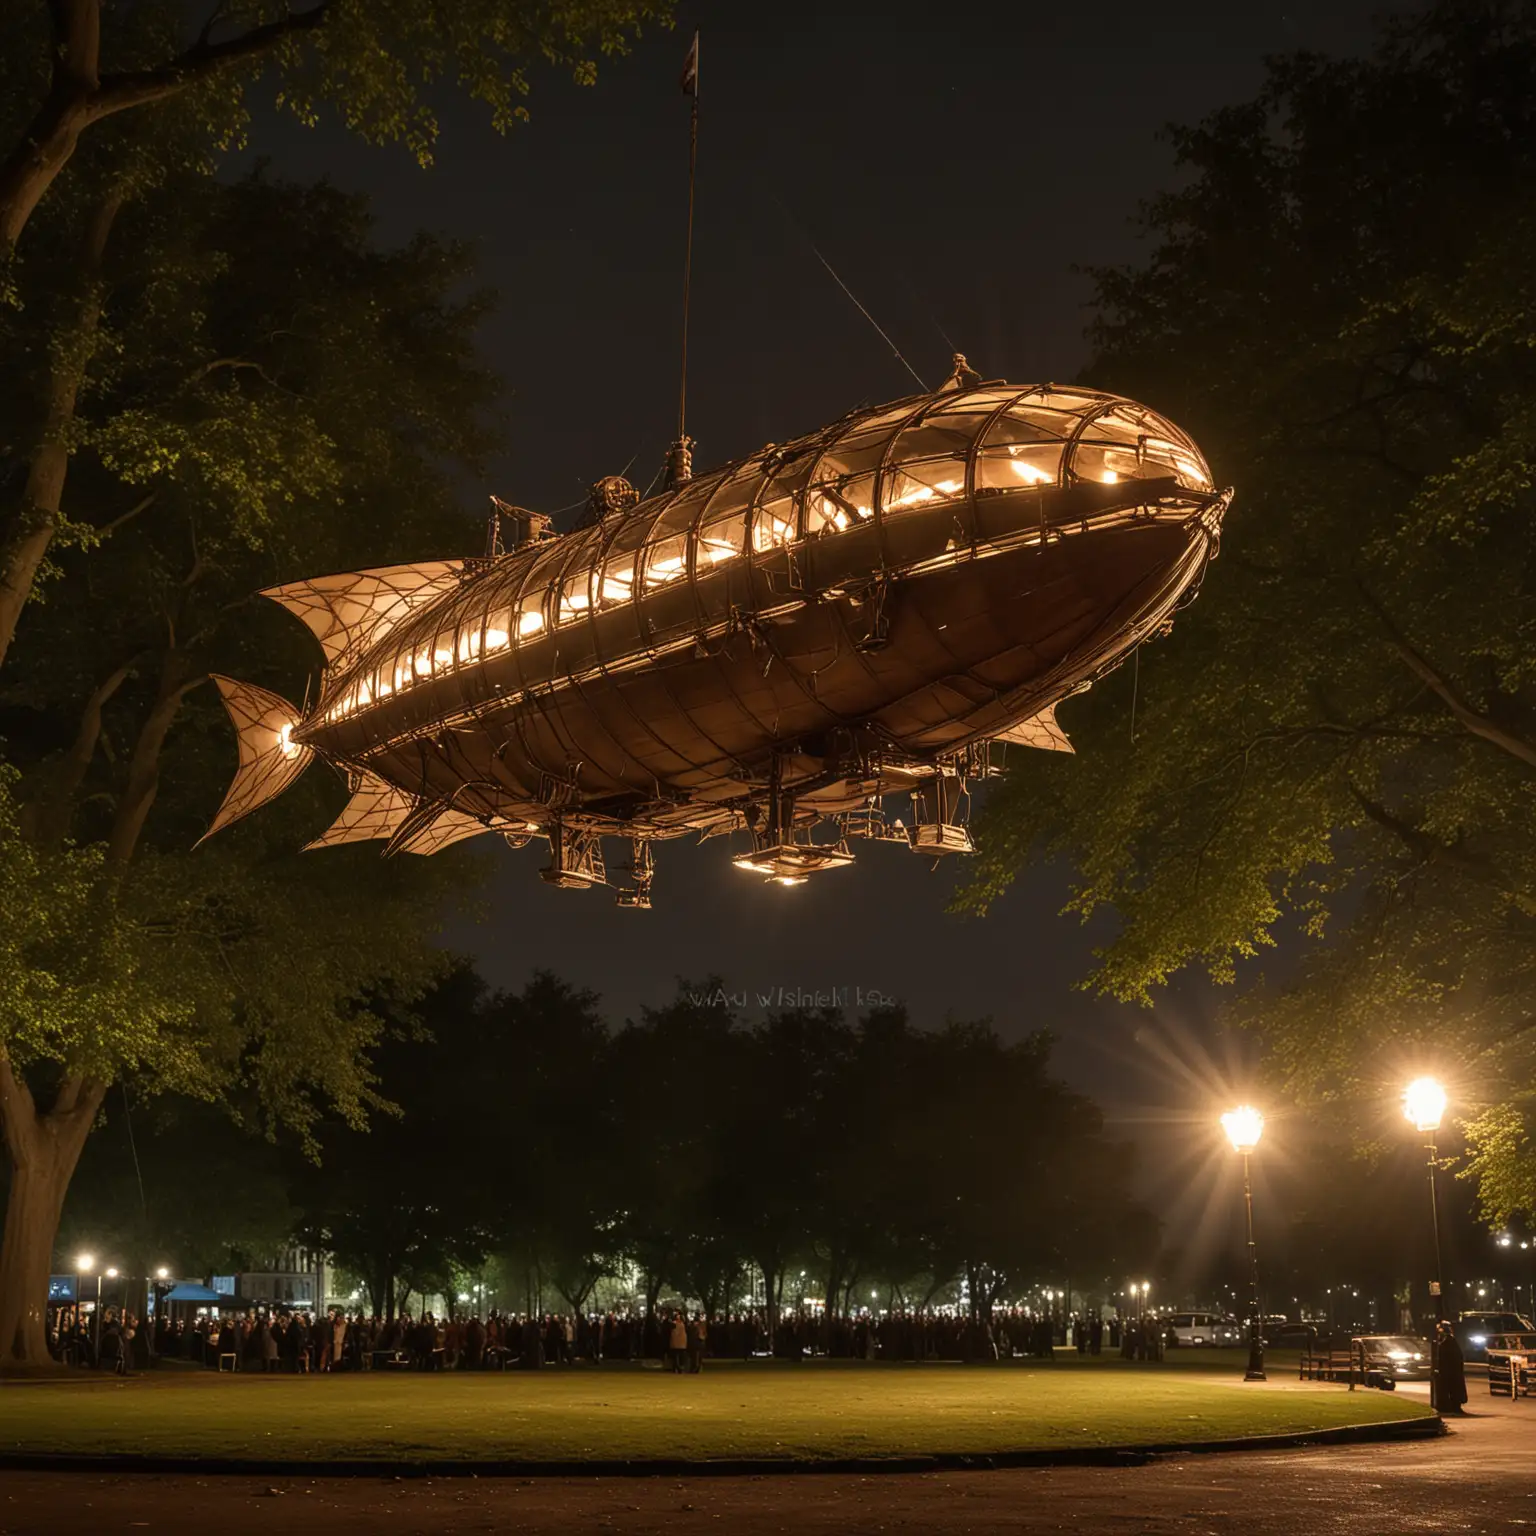 A small Steampunk airship, suitable for 6 people and shaped like a sleek fish, floating at its mast in Victorian Hyde park. It’s lit from below by spotlights on the ground, at nighttime 